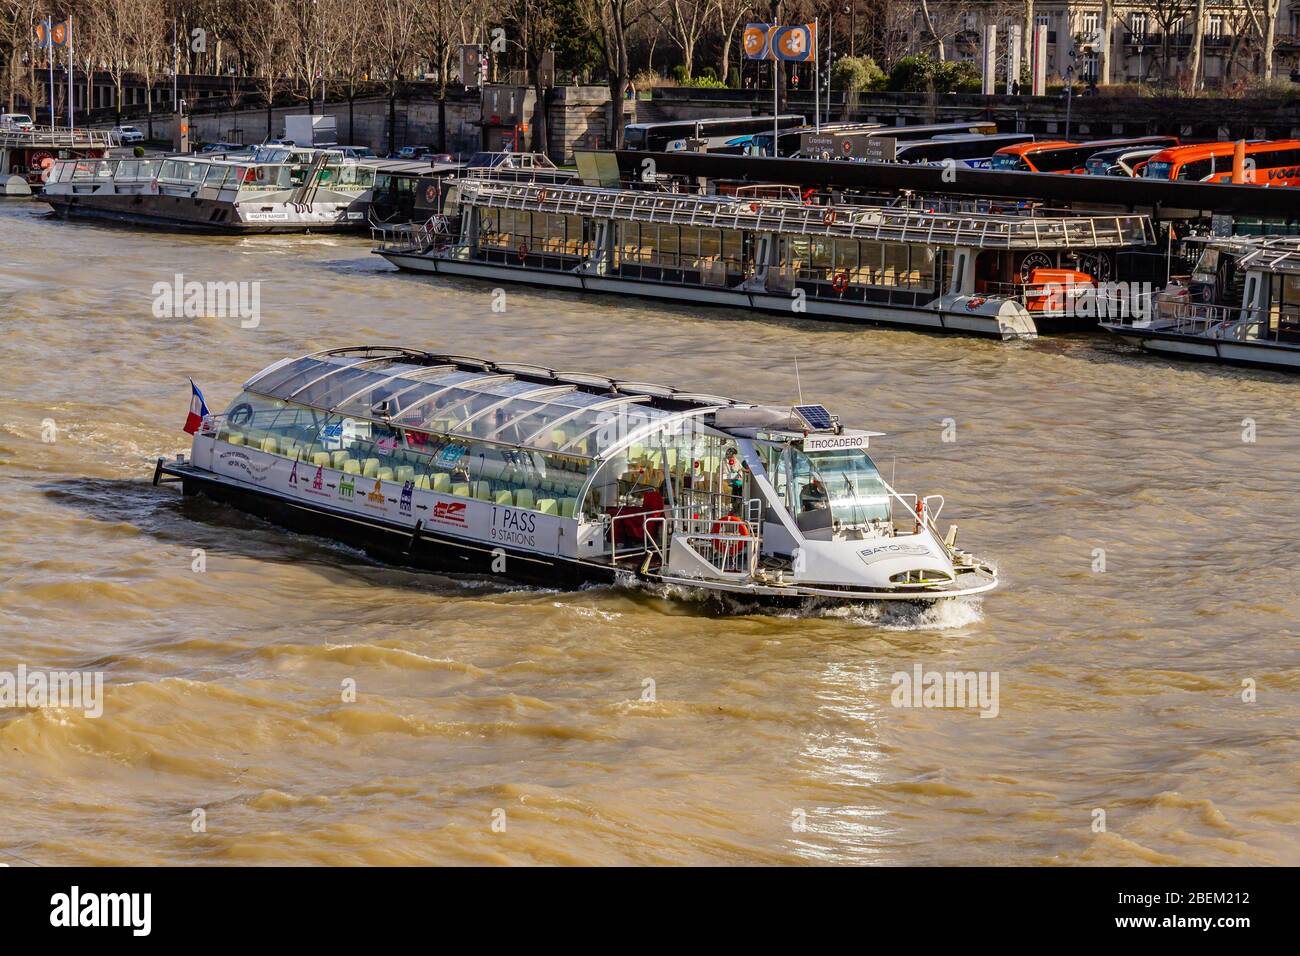 A sightseeing boat on the River Seine in winter. Paris, France. February 2020. Stock Photo